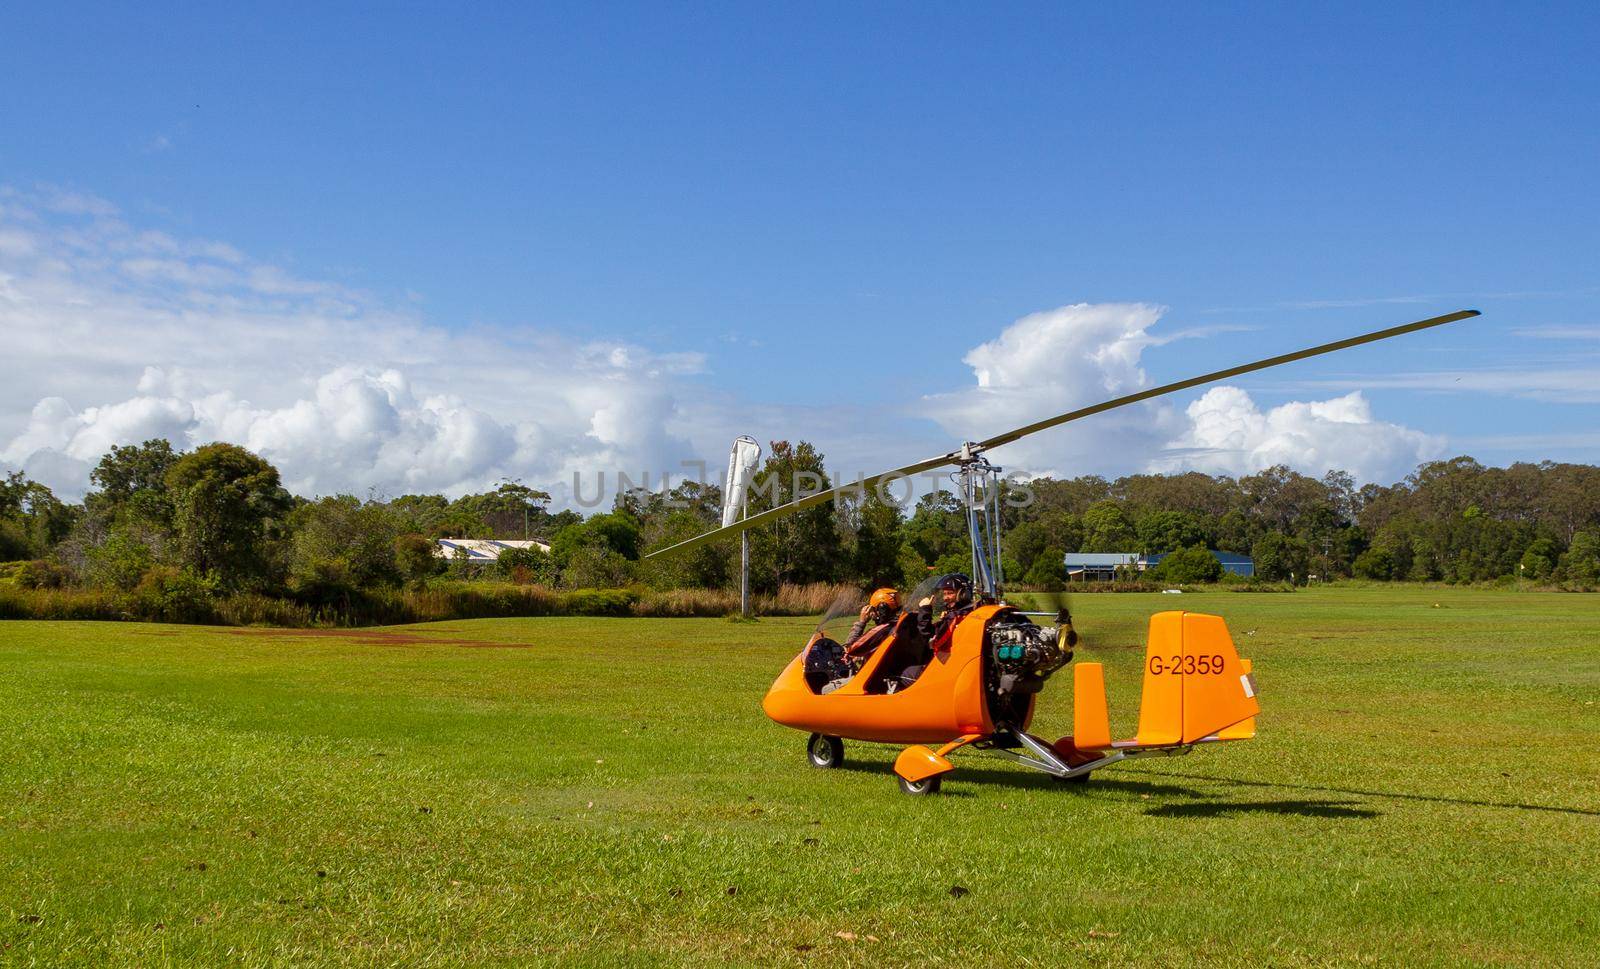 Takeoff of a gyrocopter on an grass airfield in Bayron Bay, Queensland, Australia by bettercallcurry